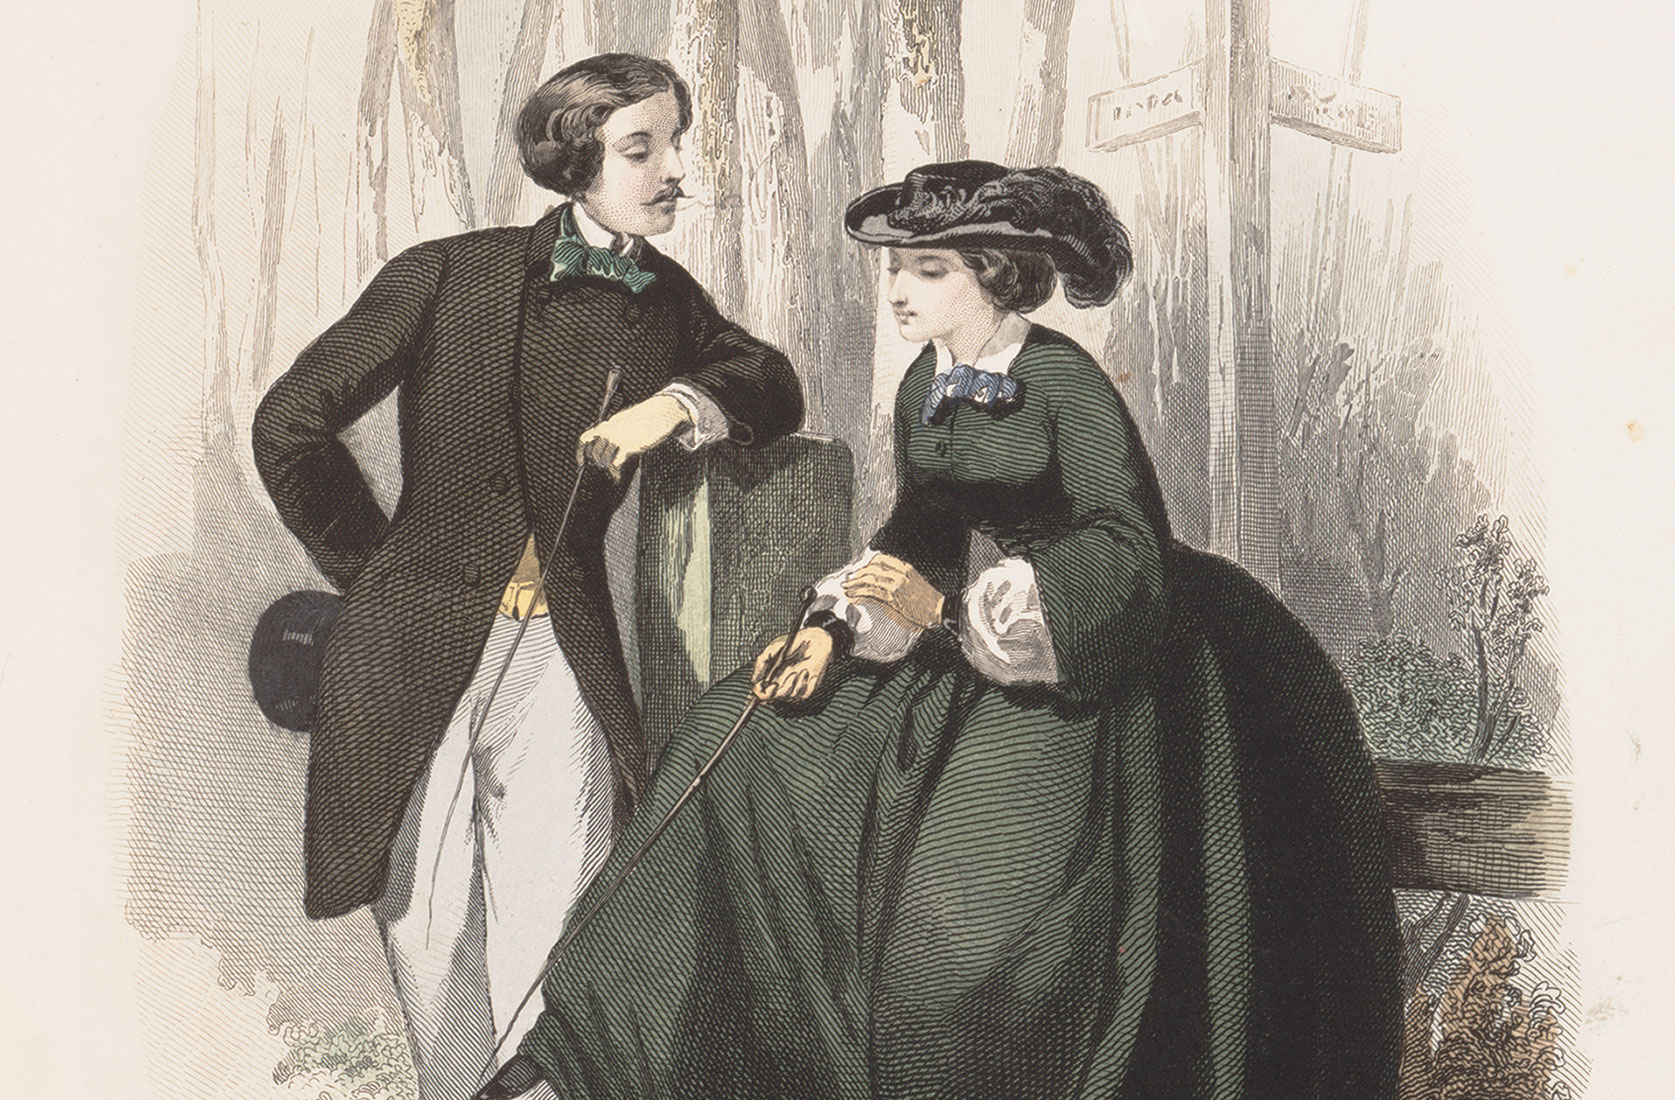 a fashion plate of a riding habit from 1857